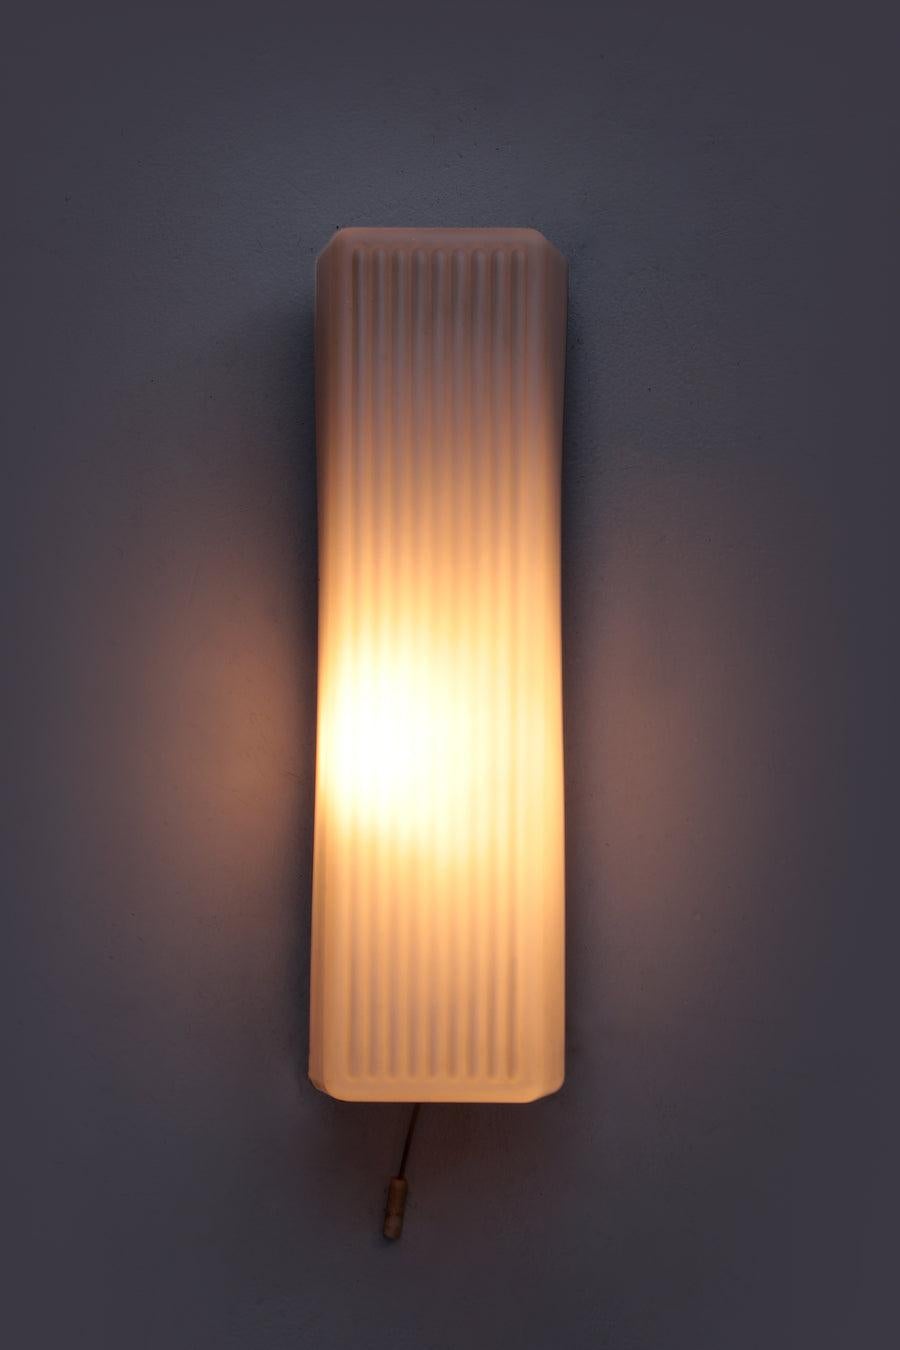 Wall Lamp Made of Frosted Glass, Sleek Model, 1960 Germany

and lamp made of frosted glass, sleek model, 1960s Germany.

There is a small pull string on the lamp, a nice light that can be hung in various places.

Kitchen, bathroom, hallway or